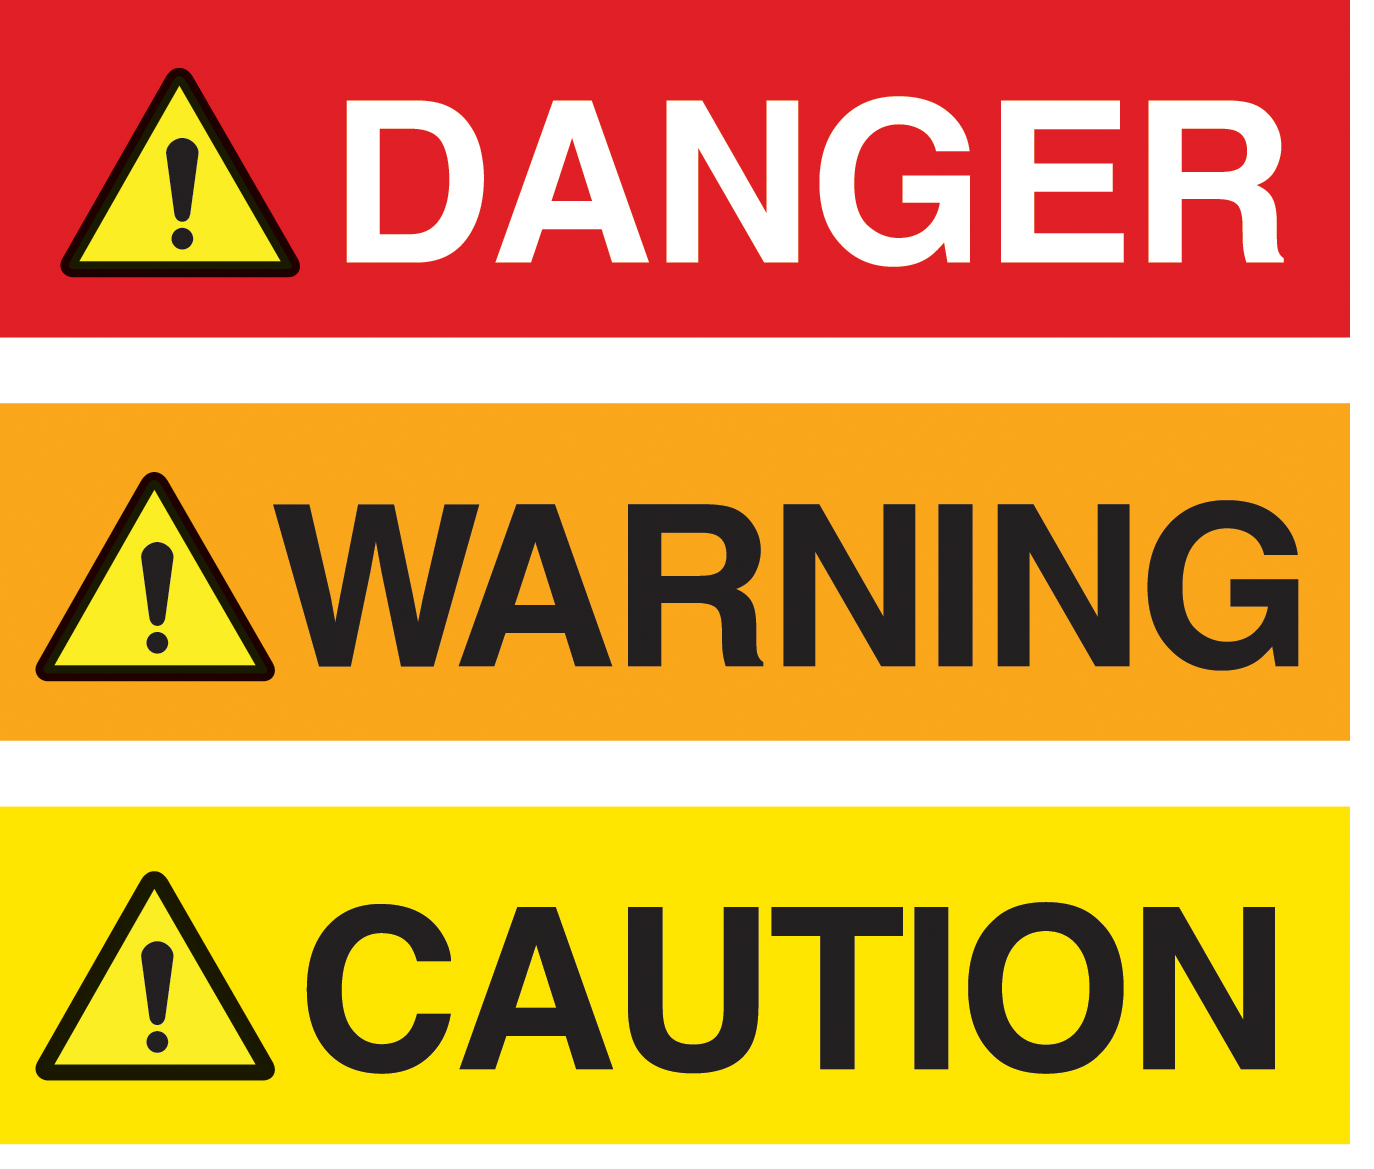 caution-danger-and-warning-signs-high-res-vector-graphic-getty-images